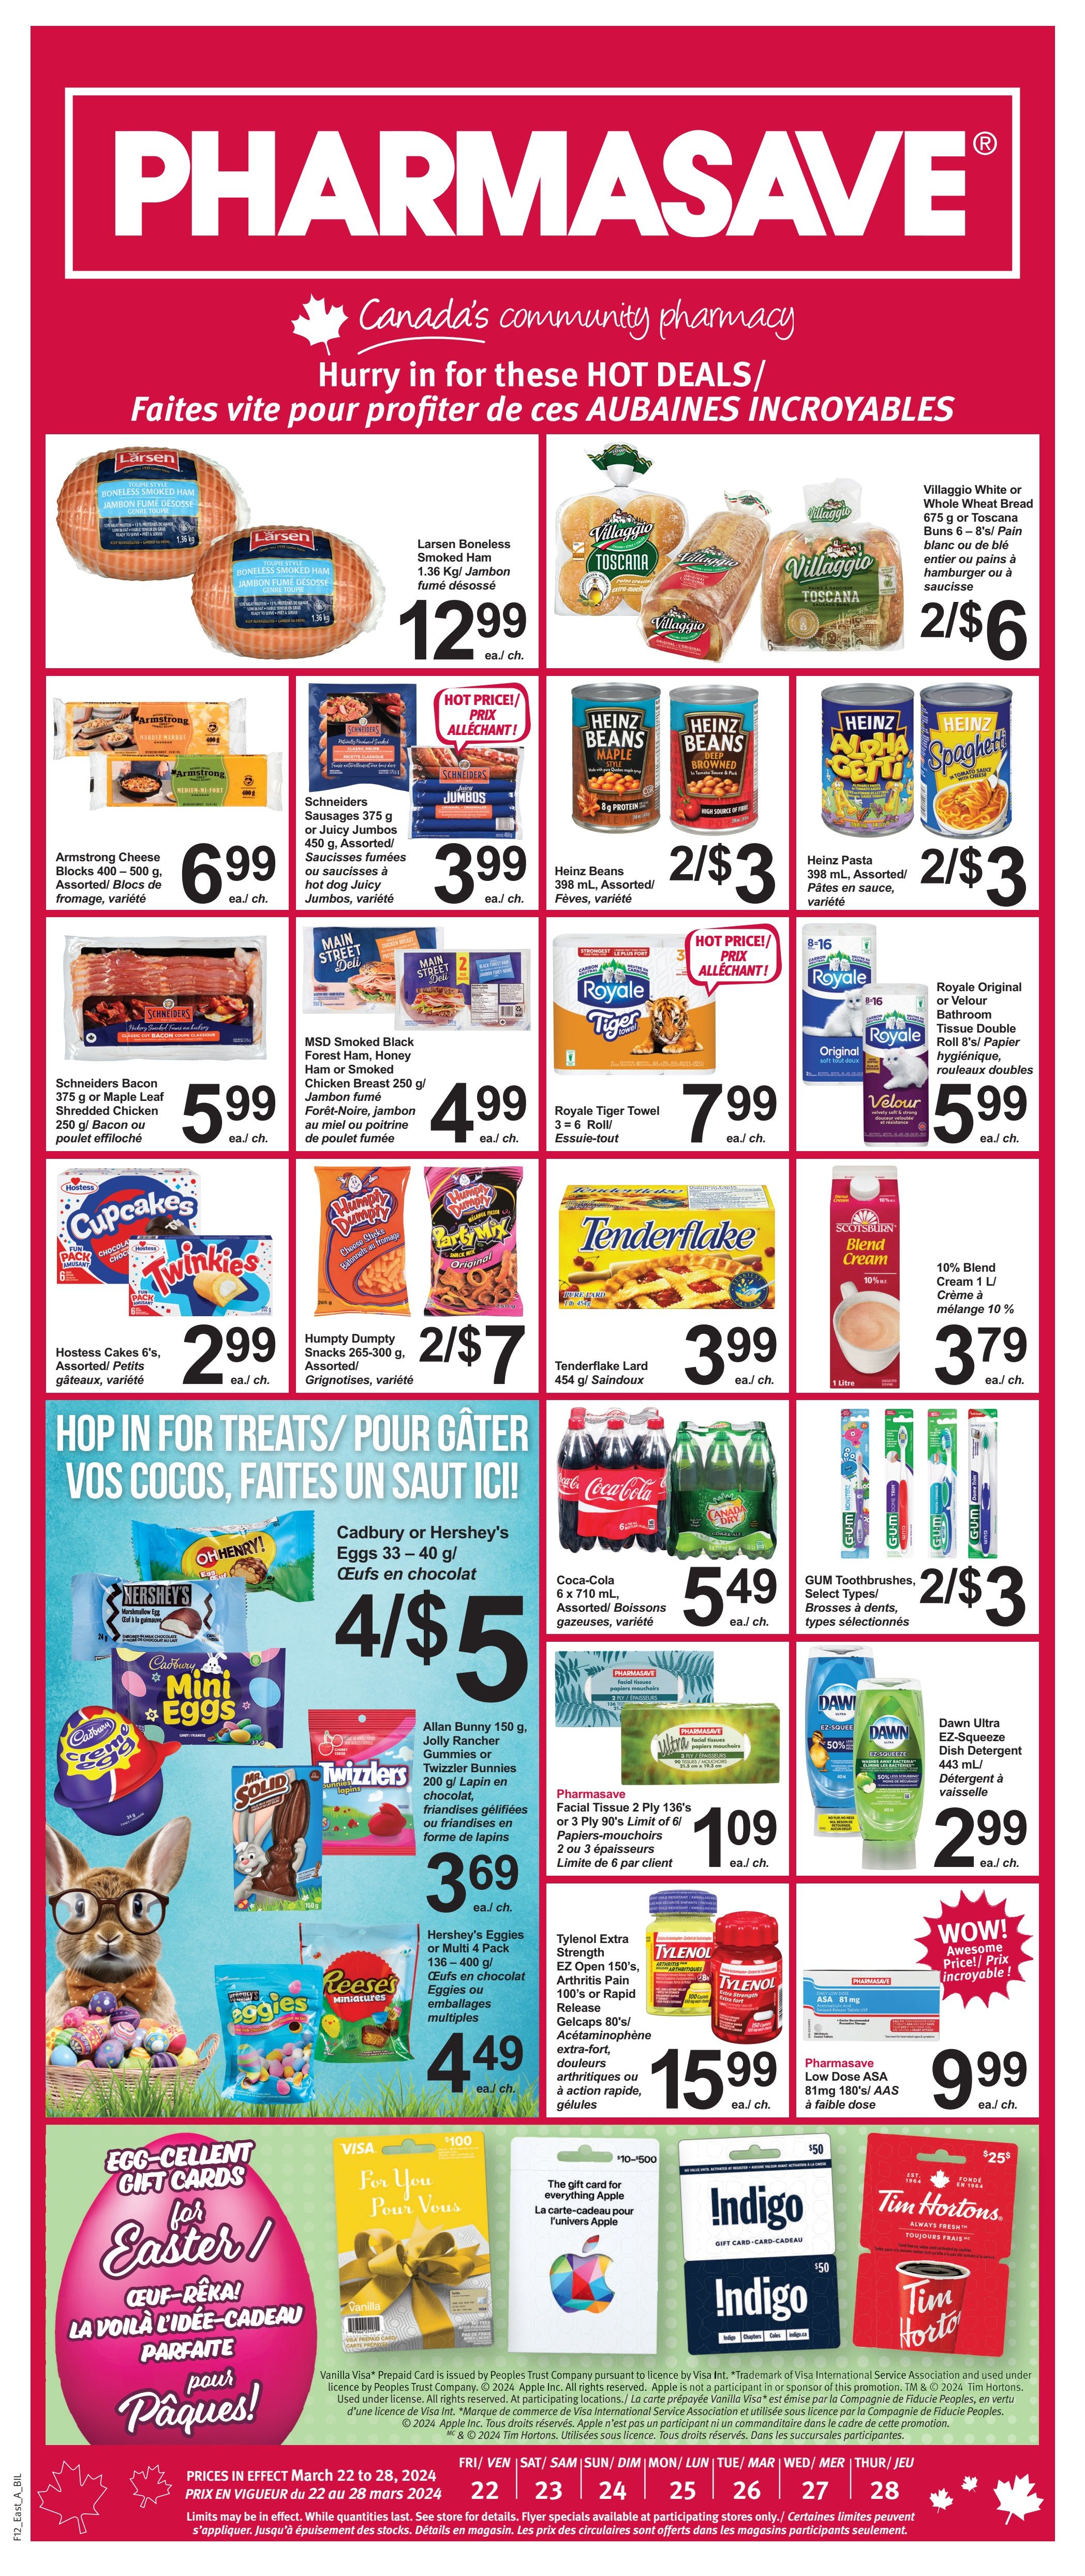 Pharmasave - New Brunswick - Weekly Flyer Specials